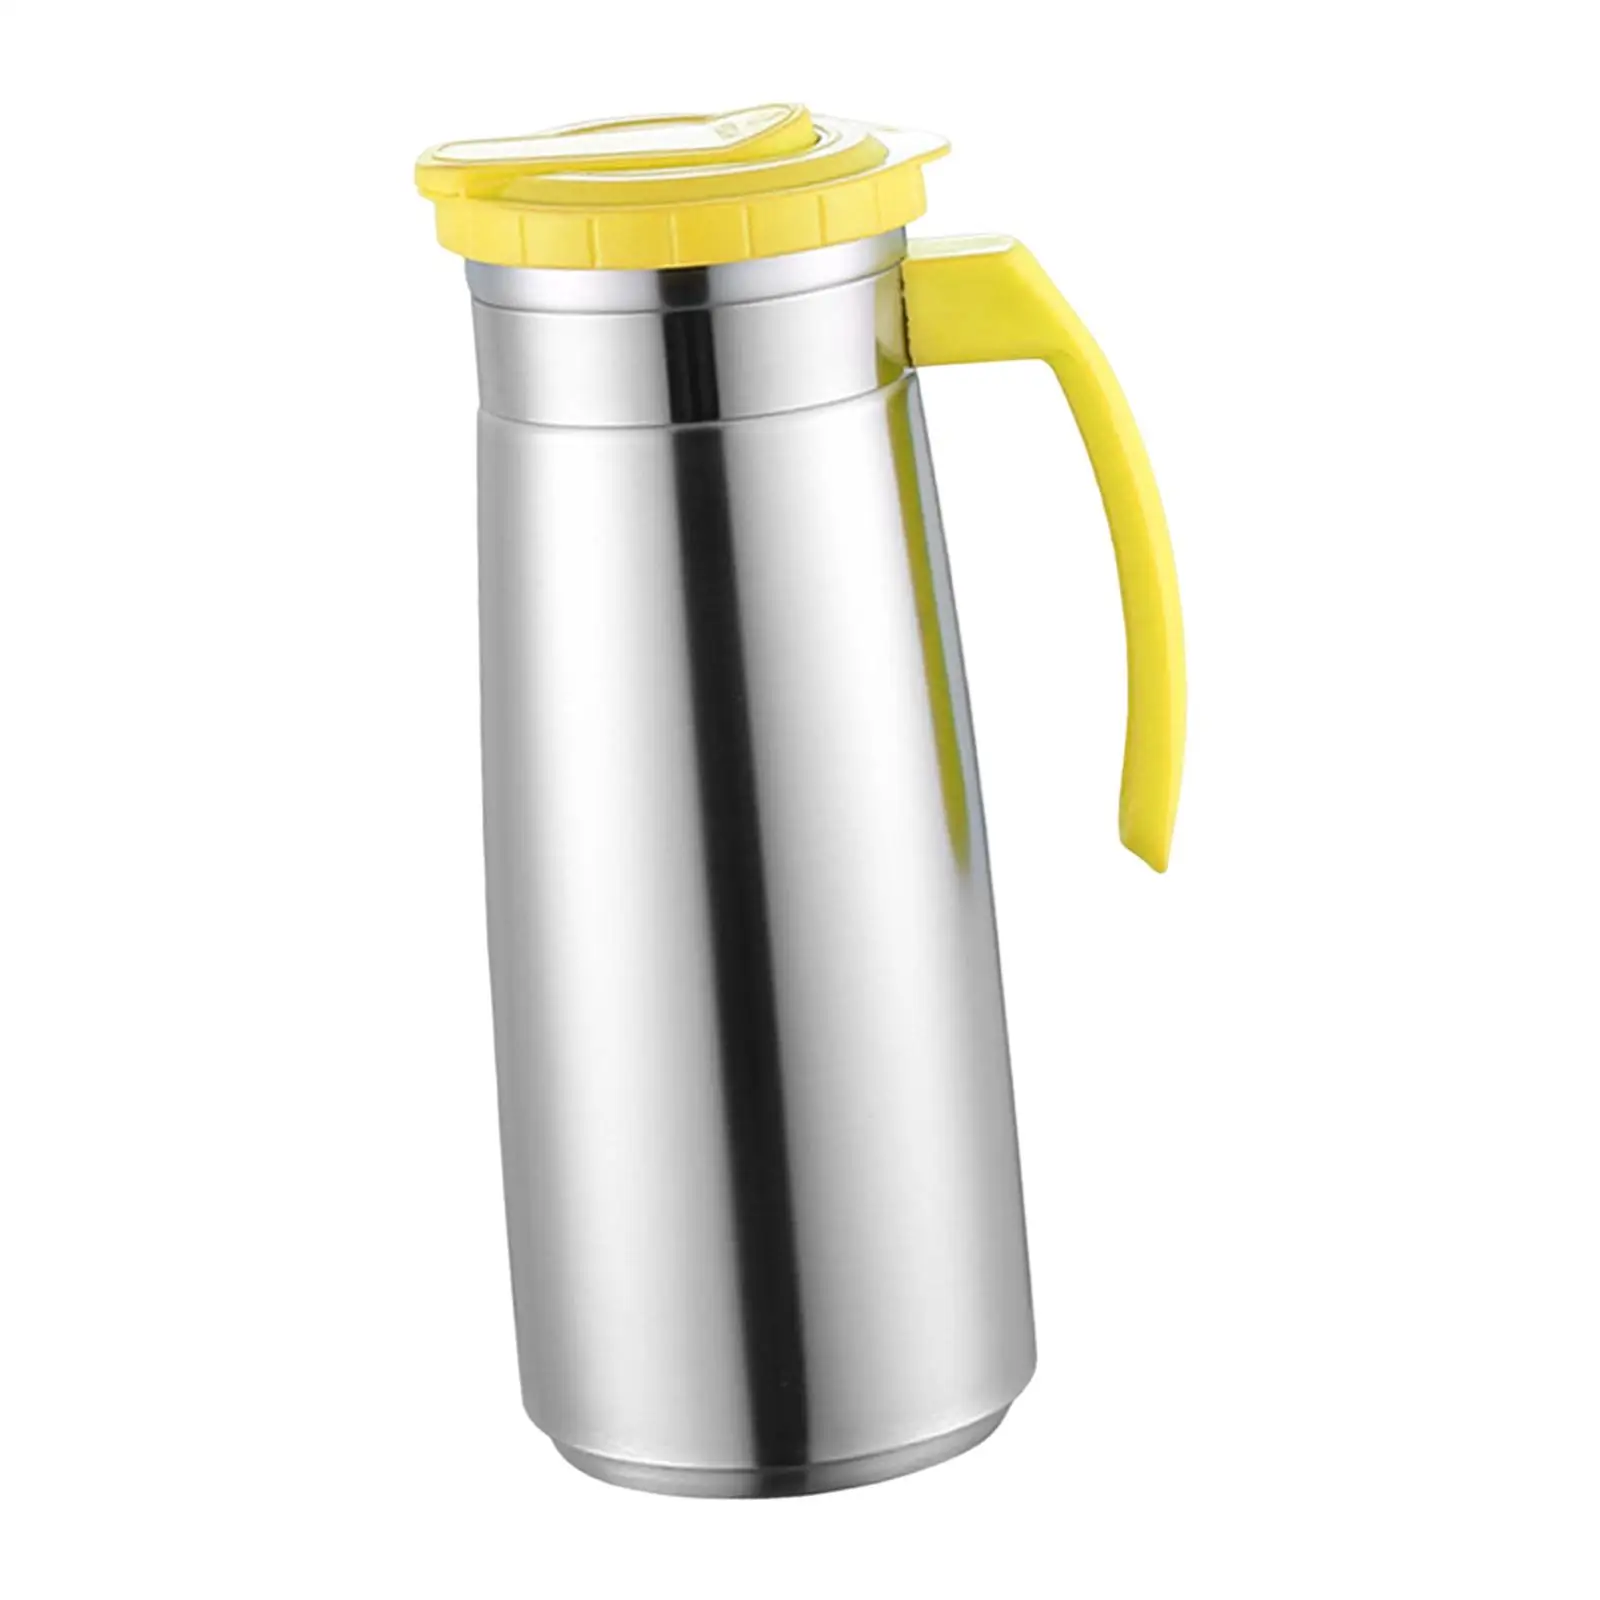 Stainless Steel Jug Water Bottle Leakproof Drinks Water Jug Carafes 1.3L Water Pitcher for Party Fridge Barbecue